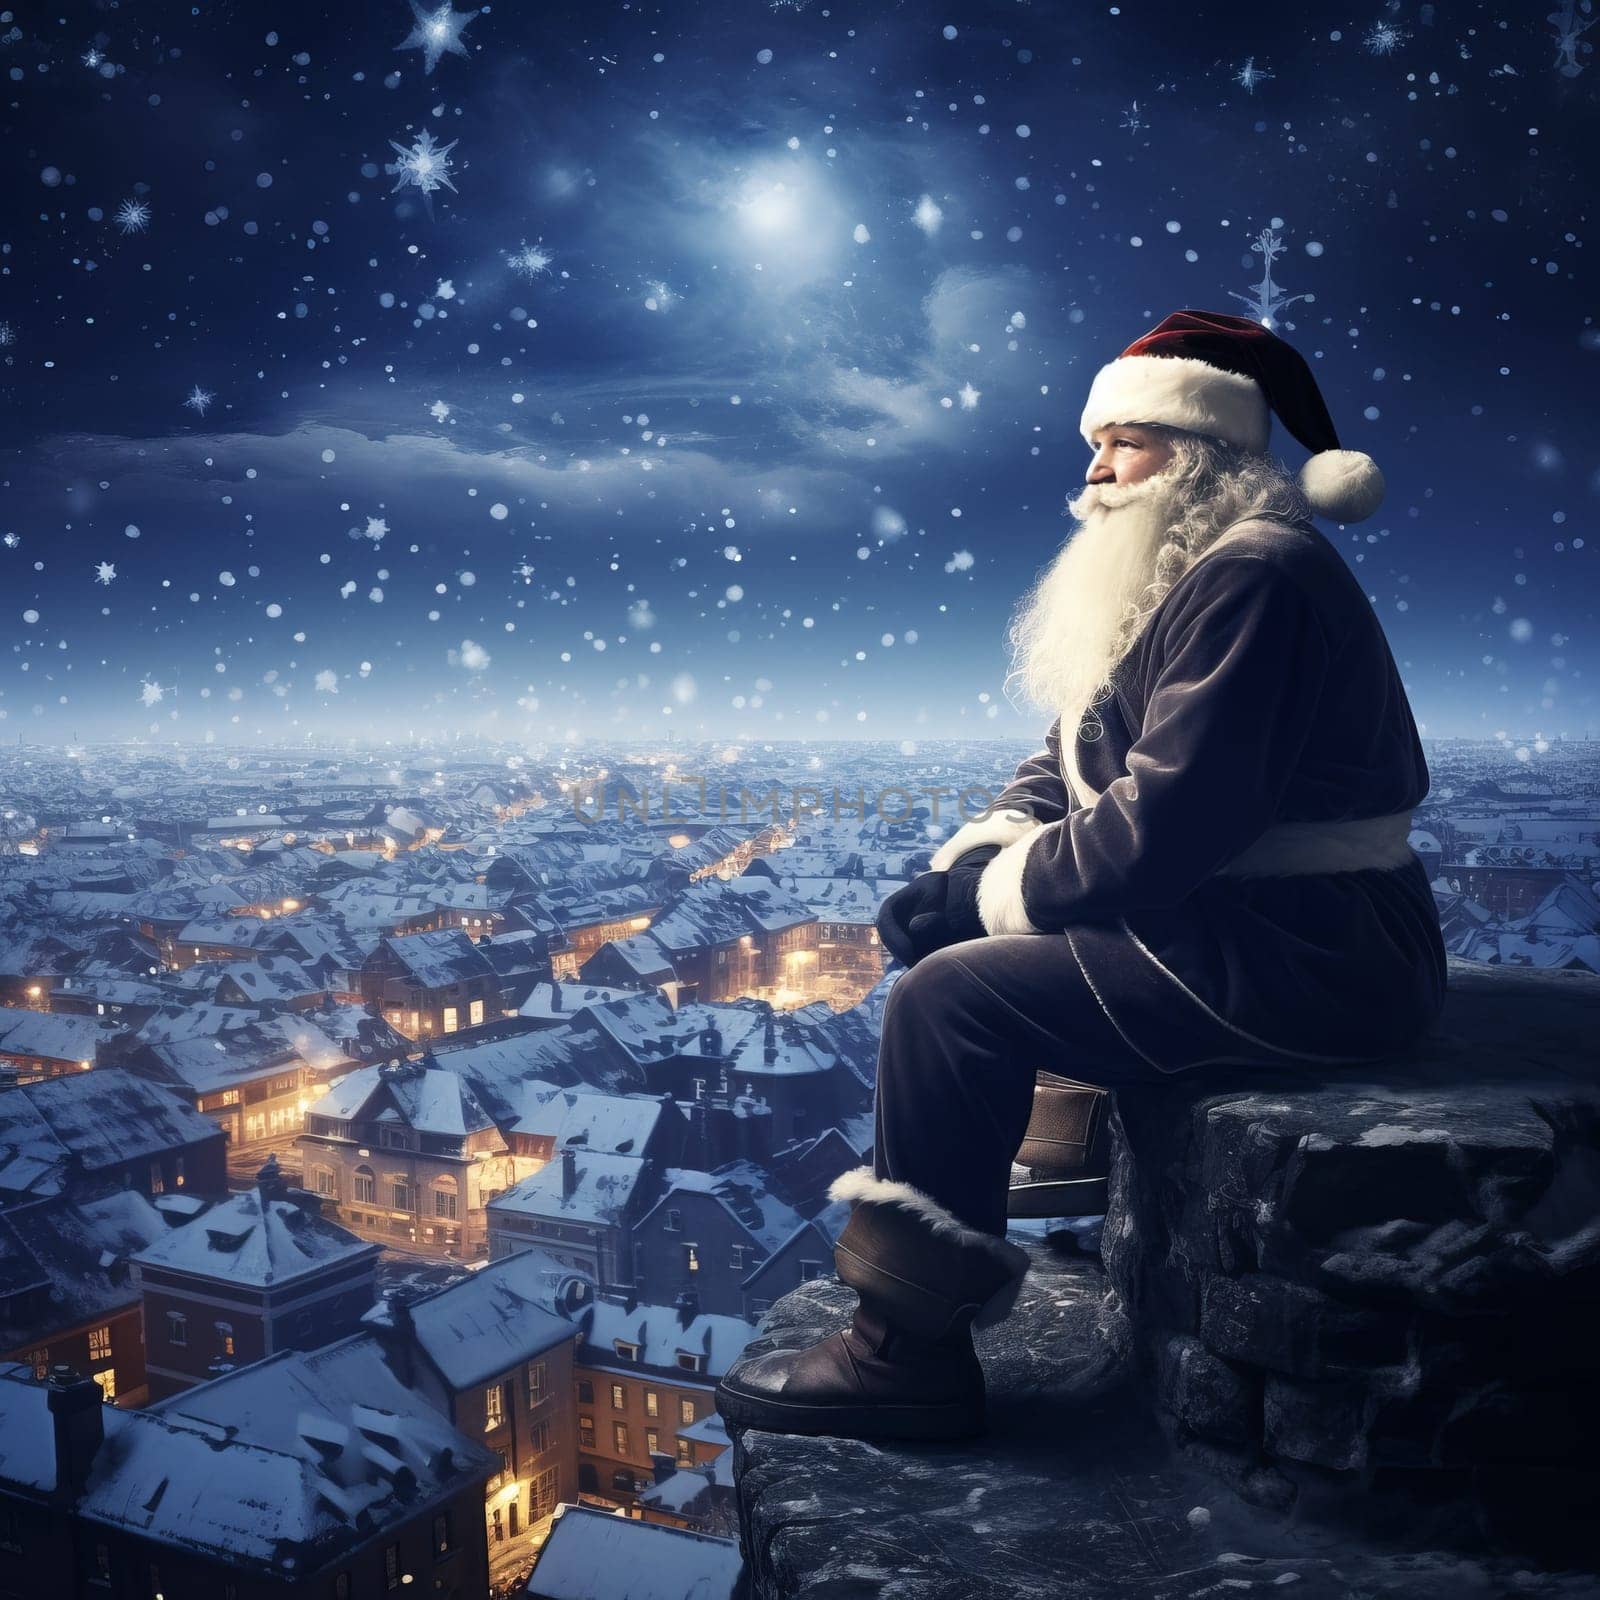 Santa Claus stands on the roof of an house on night city scene by rusak